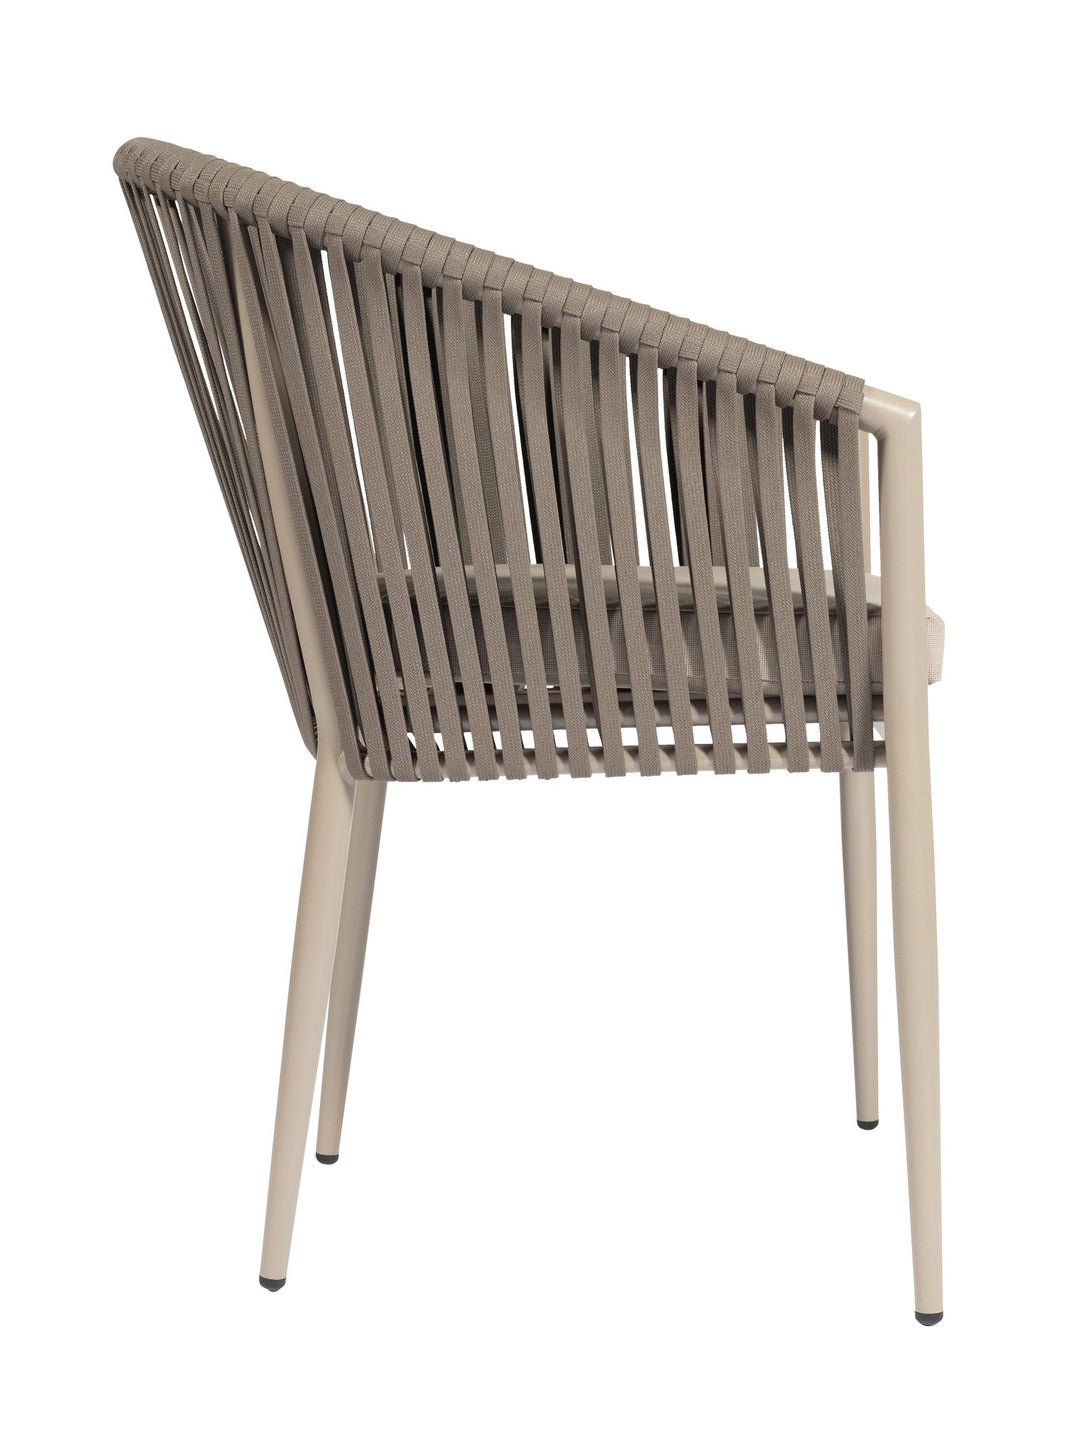 Sabi Outdoor Chair - Kitchen & Dining Room Chairs- Hertex Haus Online - badge_fully_outdoor